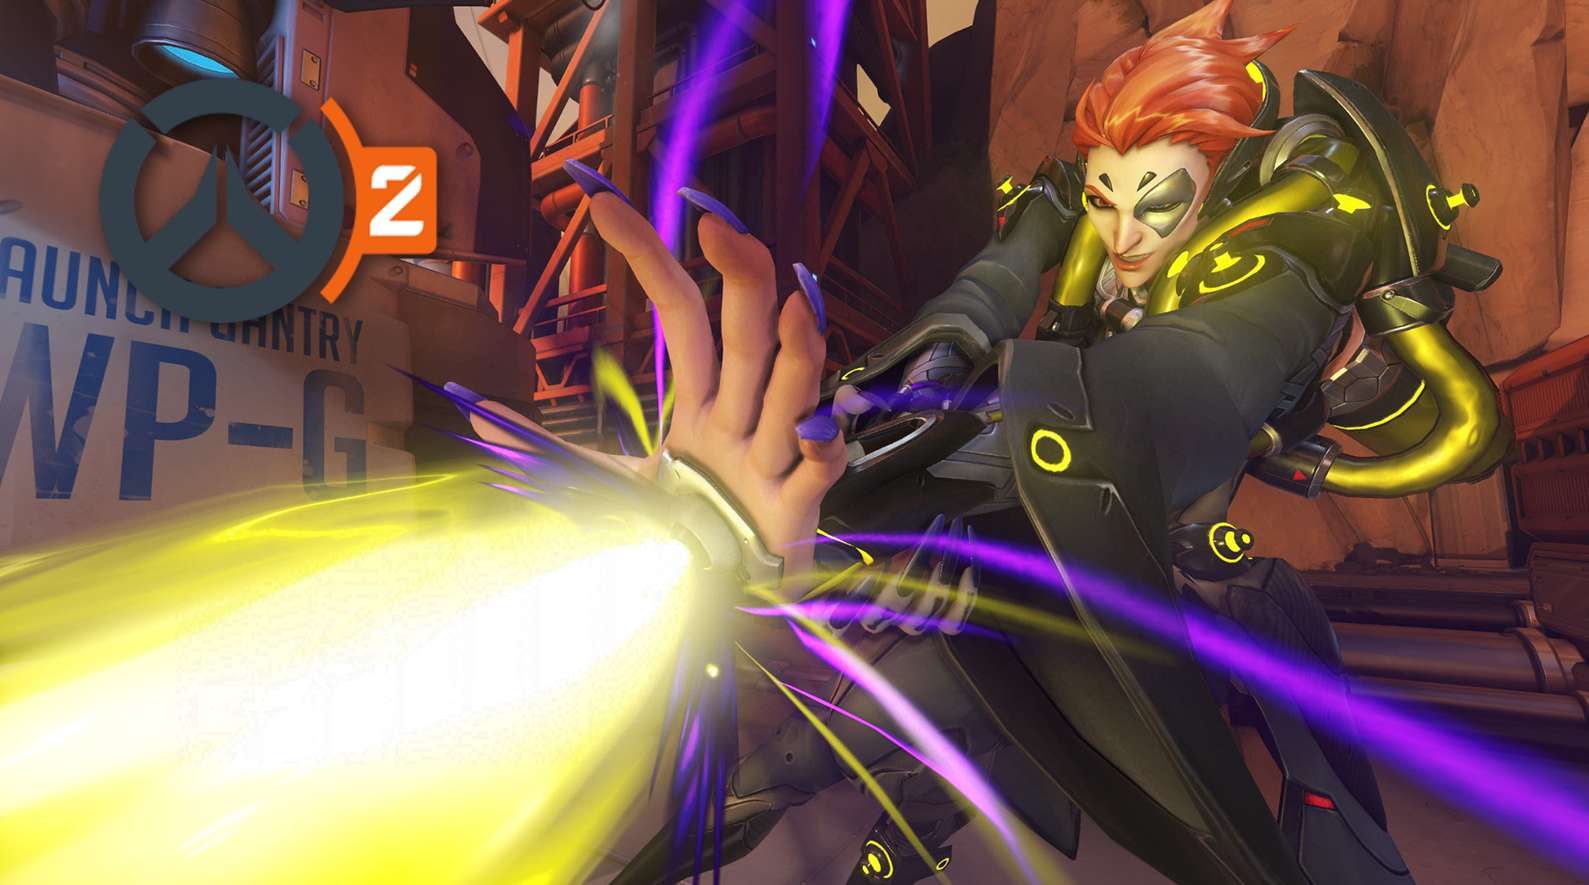 Moira Overwatch casting her Ultimate ability